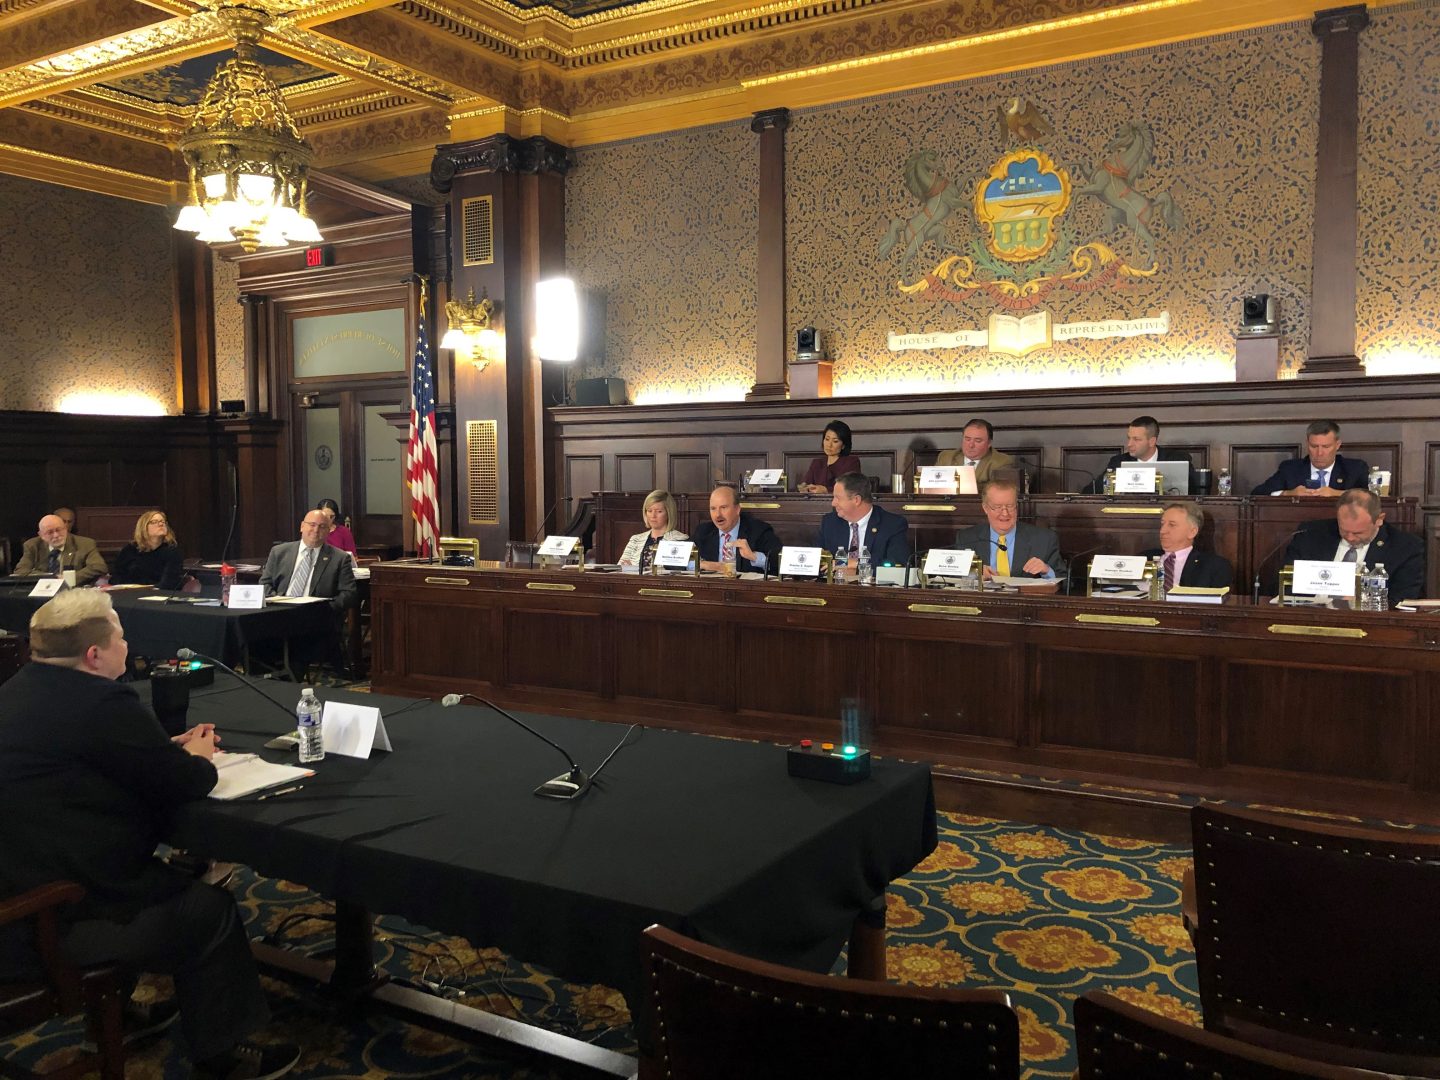 Jen Swails, Pennsylvania budget secretary, testifies before the House Appropriations Committee on March 5, 2020, at the state Capitol in Harrisburg.